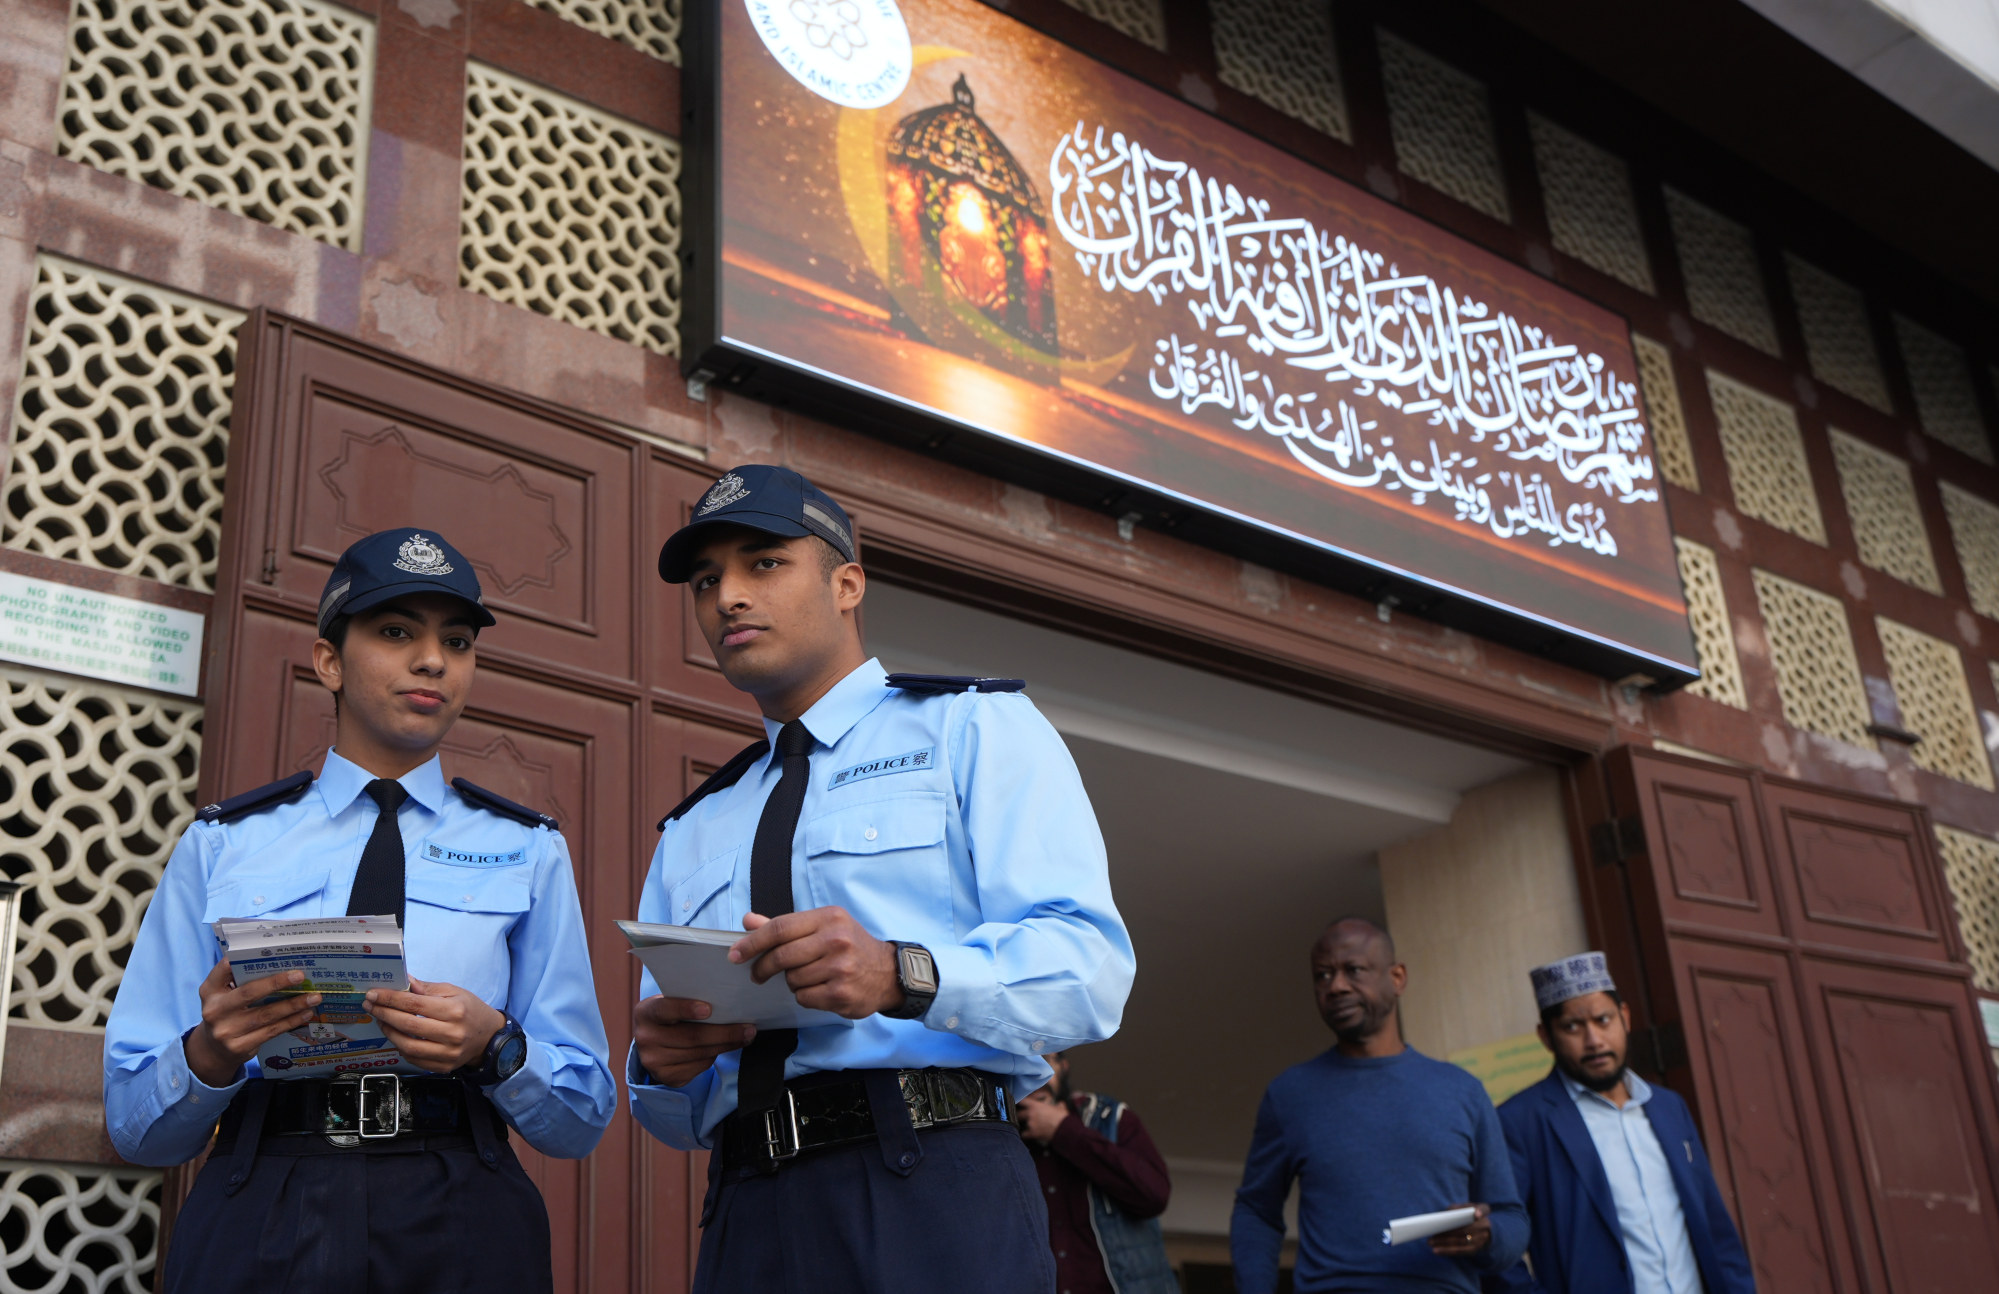 Salma Bibi (left) and Adnan Mohammad (second left) at Kowloon Mosque. Photo: Eugene Lee